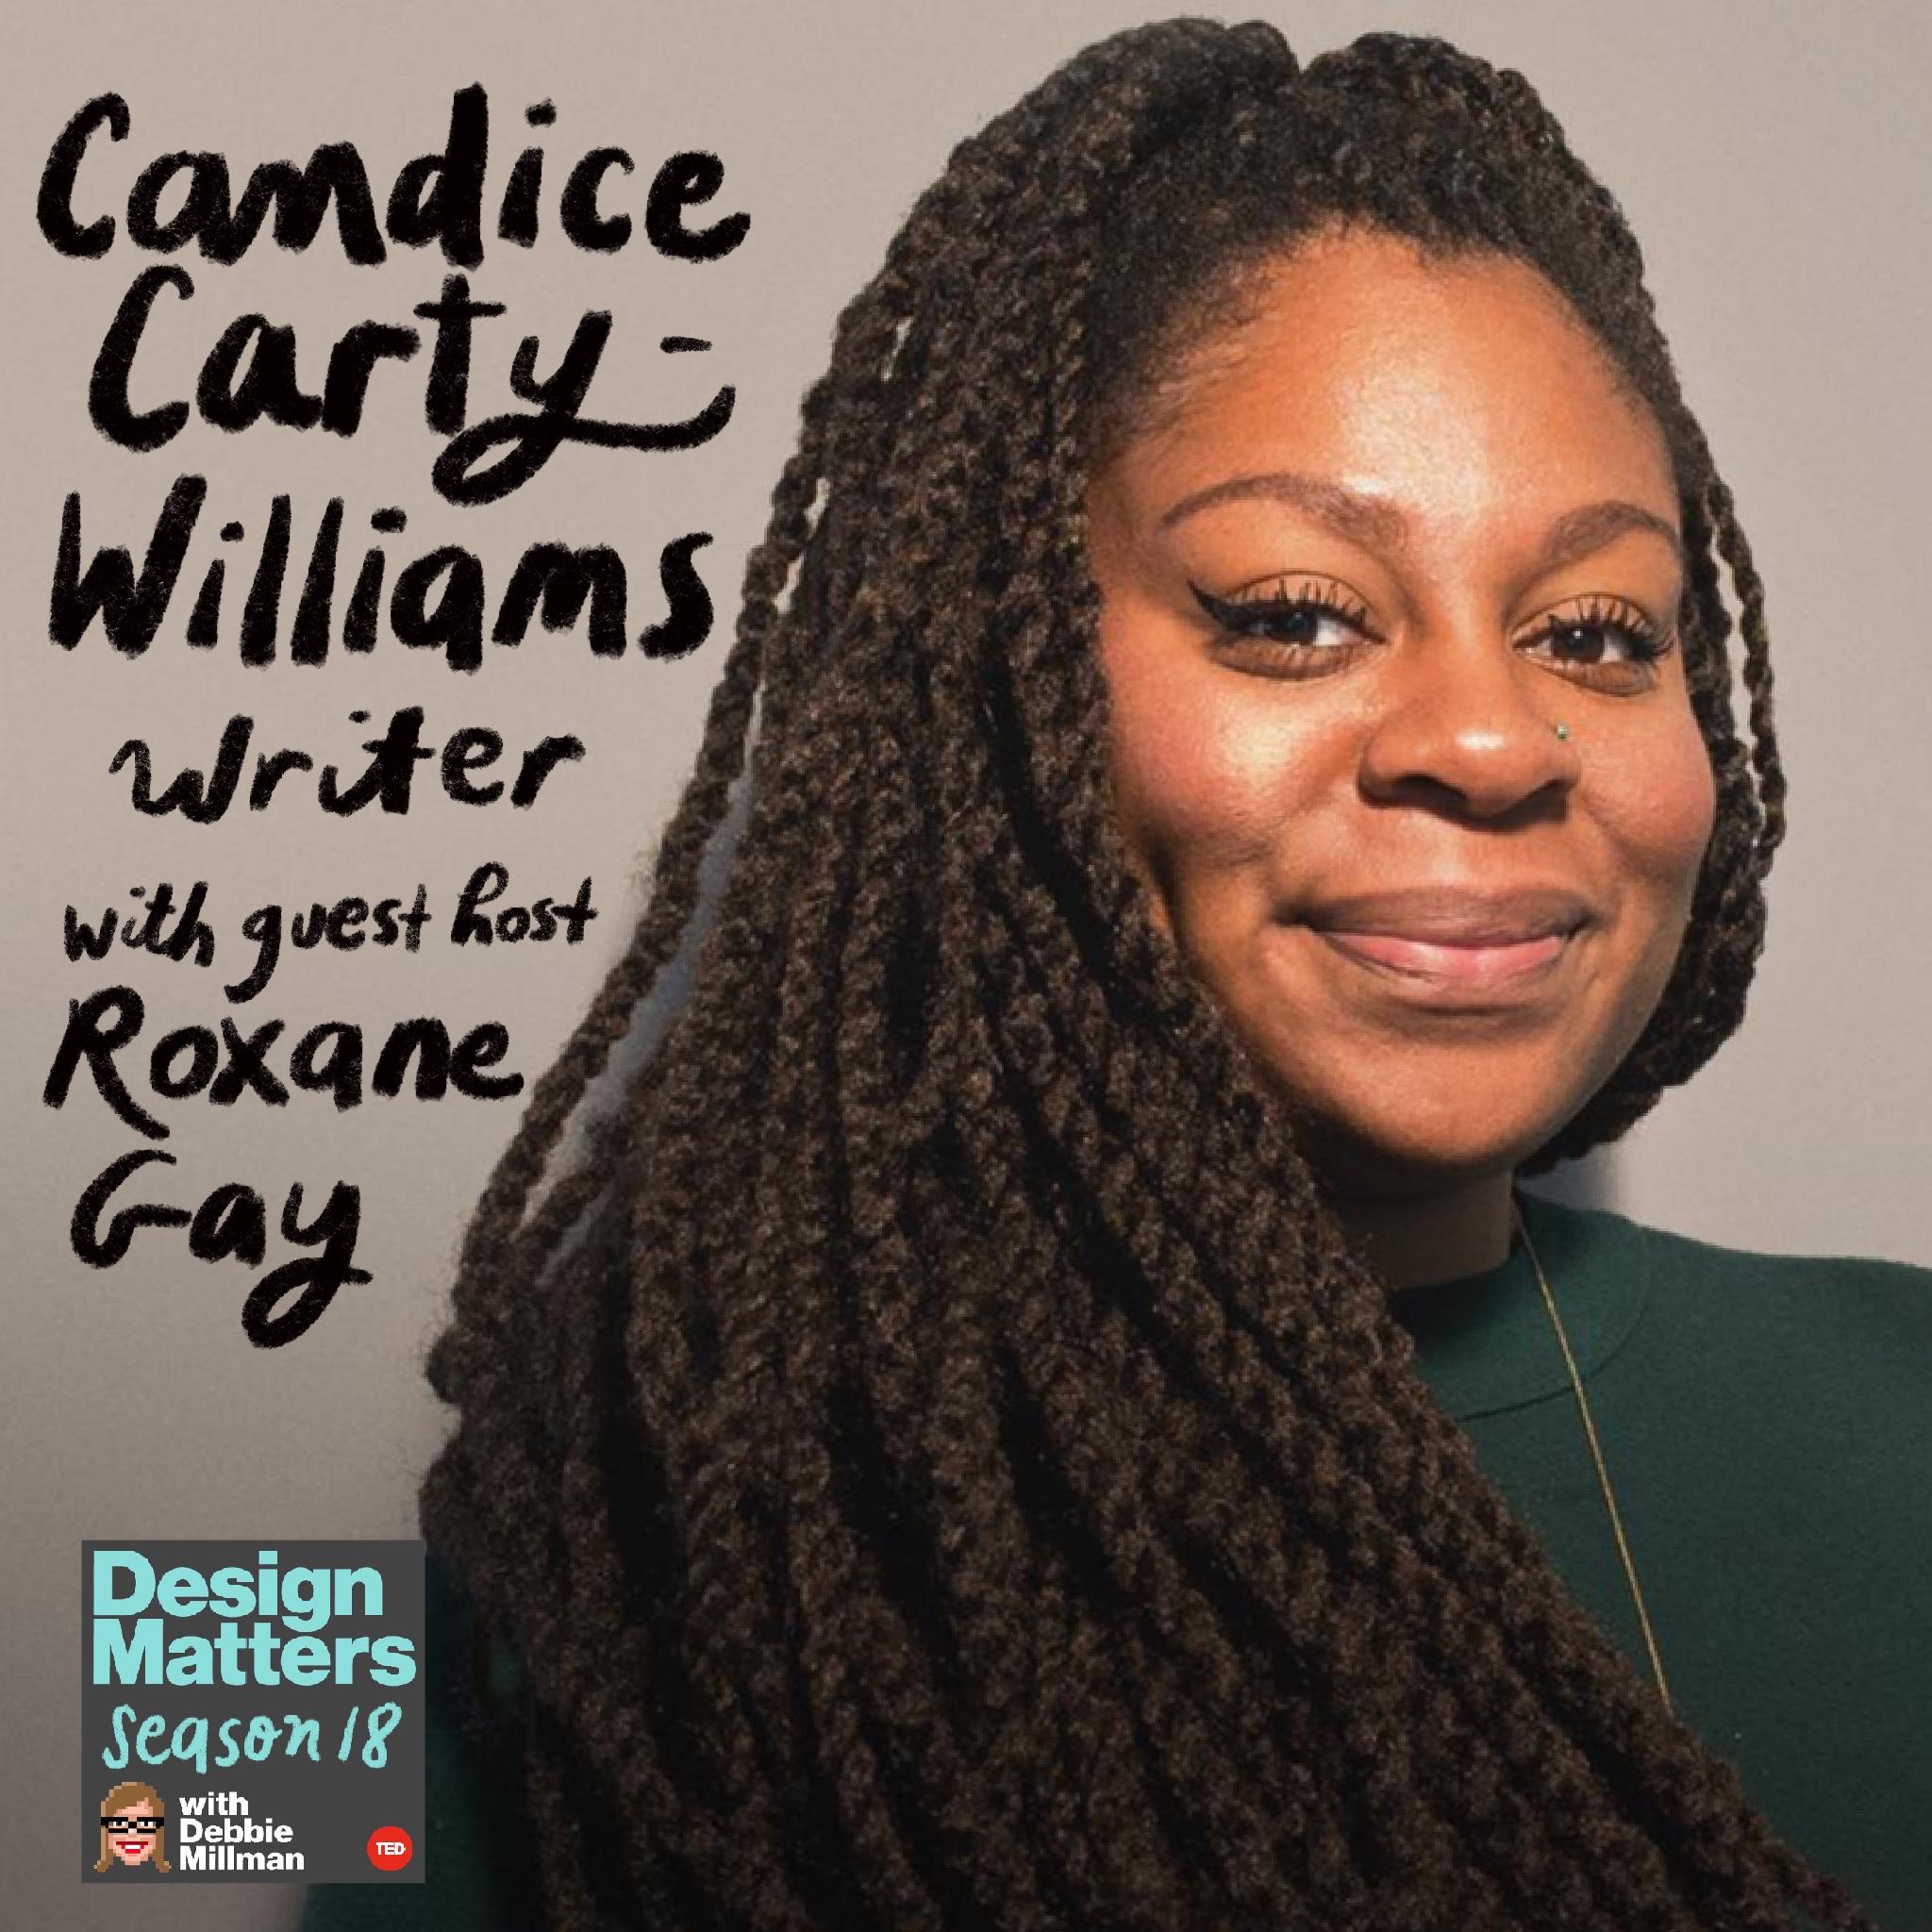 Thumbnail for "Candice Carty-Williams".